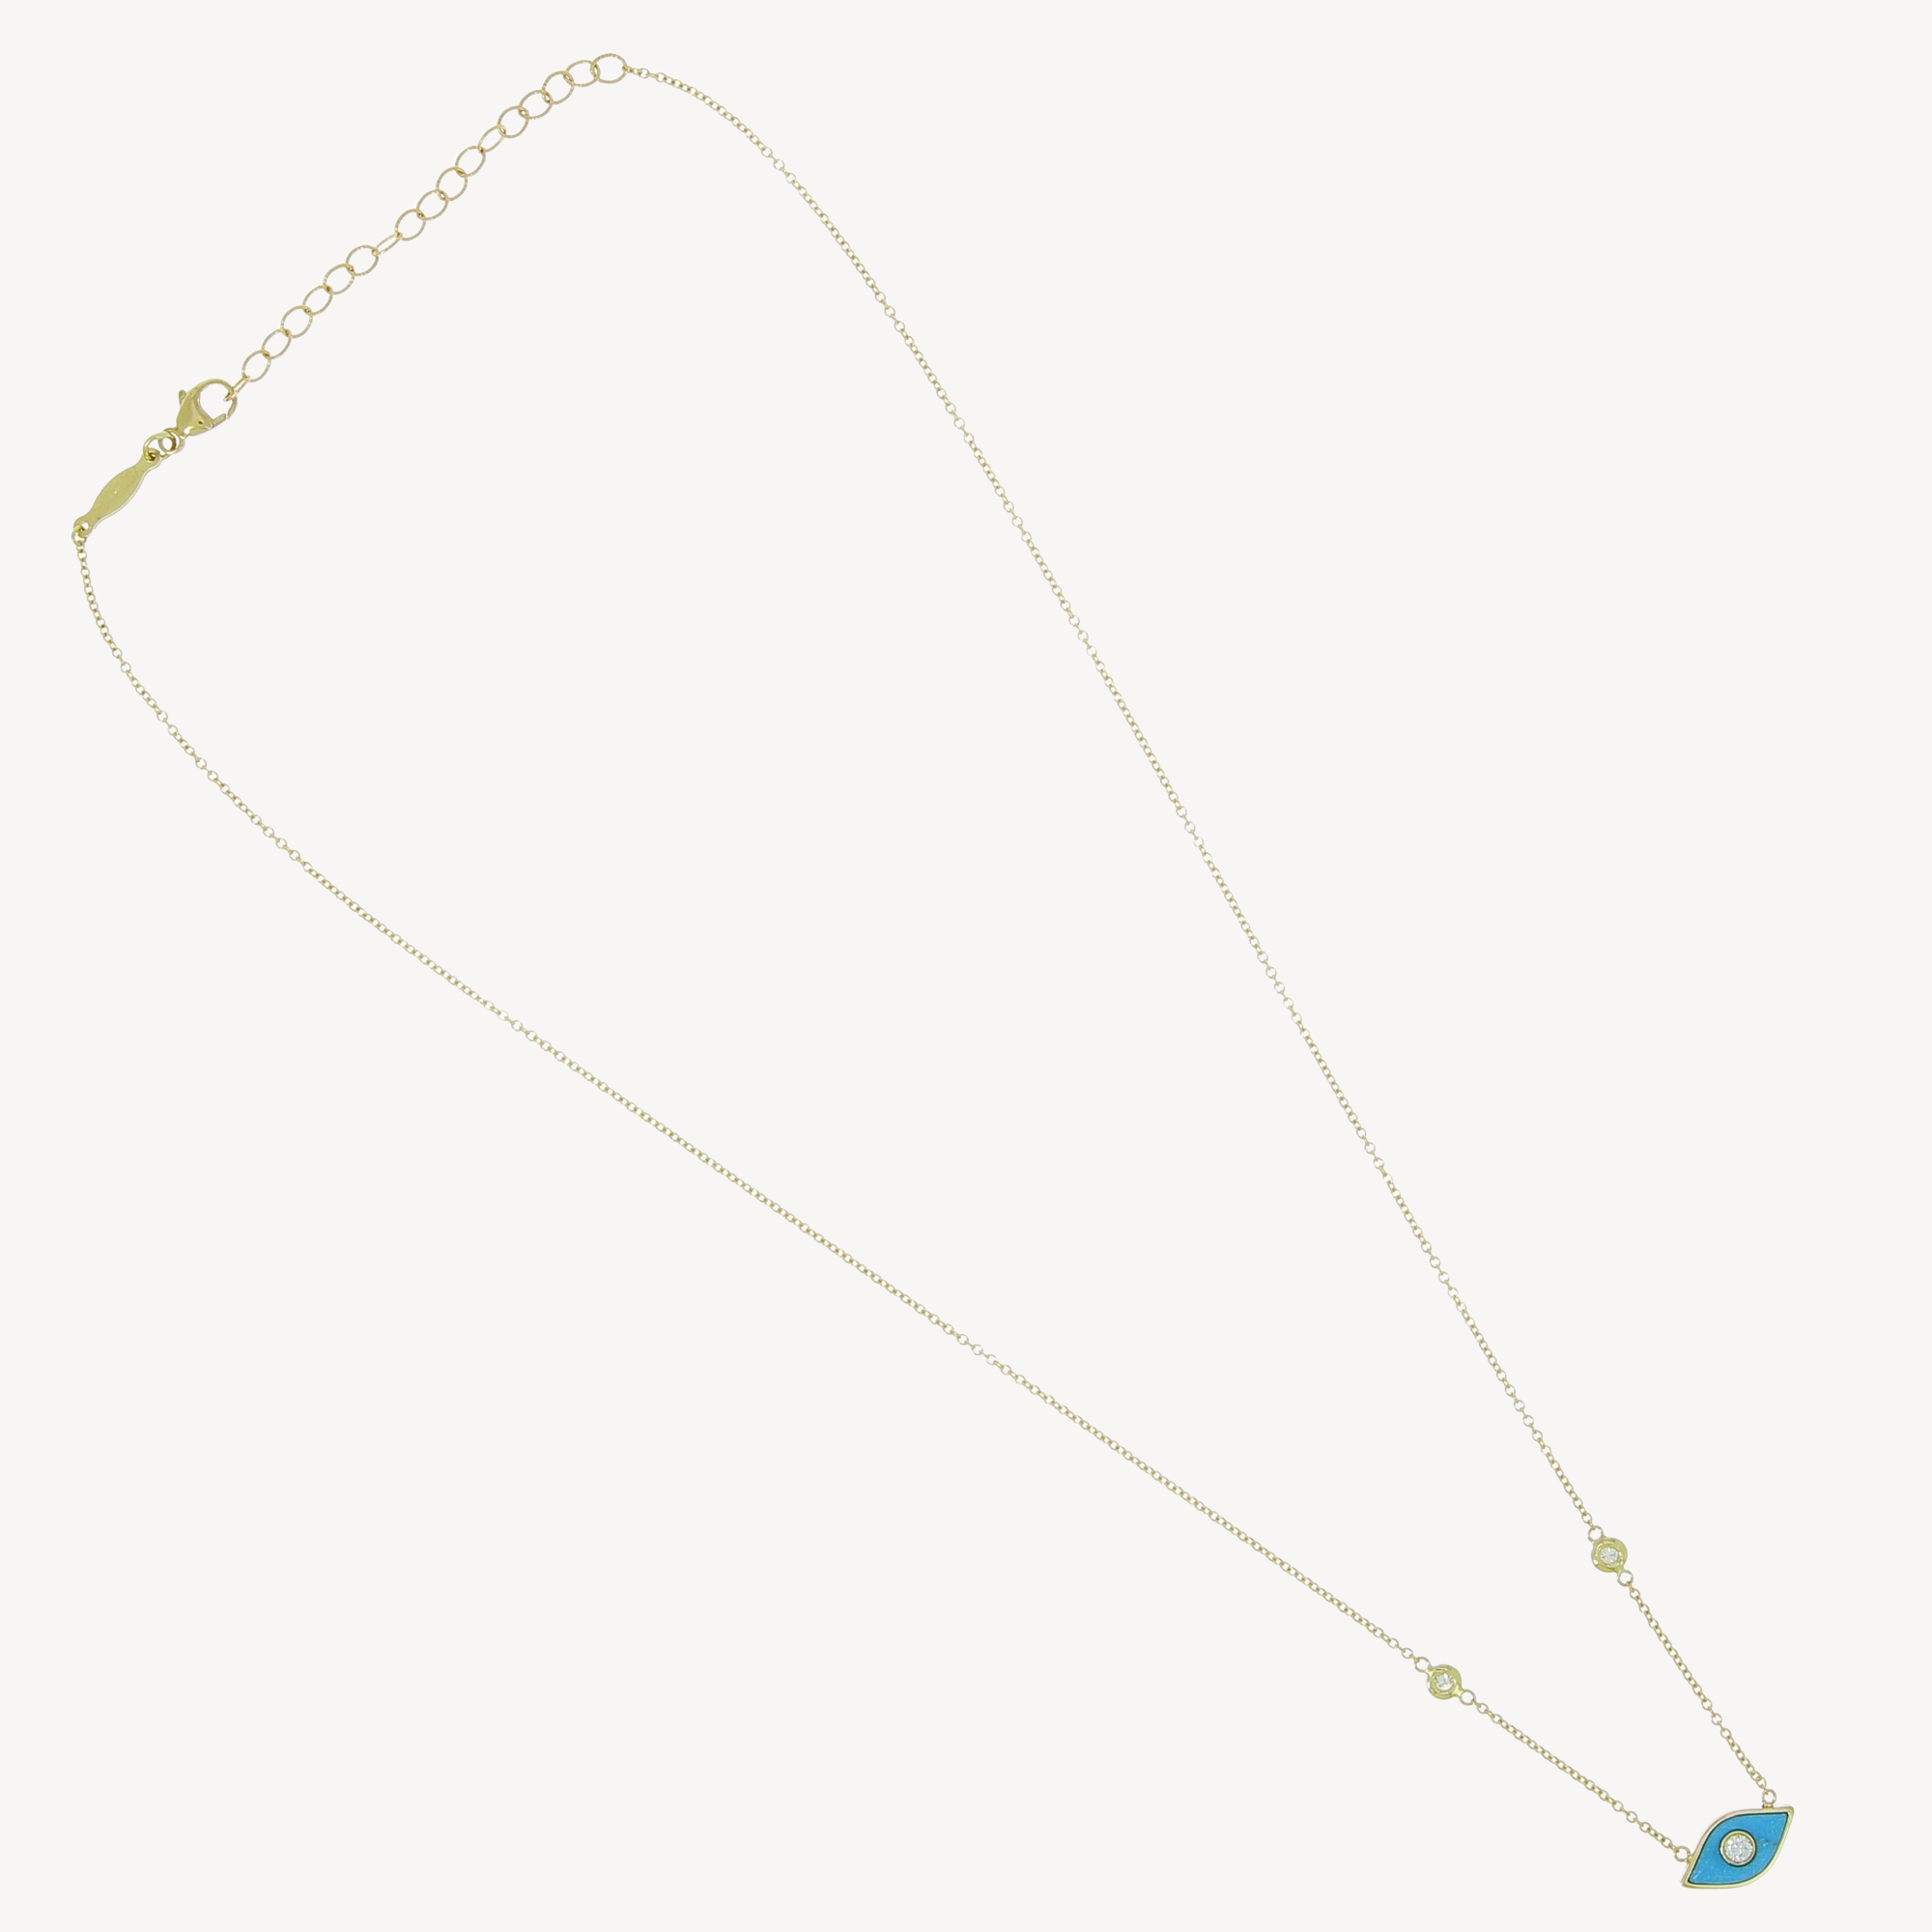 Collier oeil turquoise or jaune